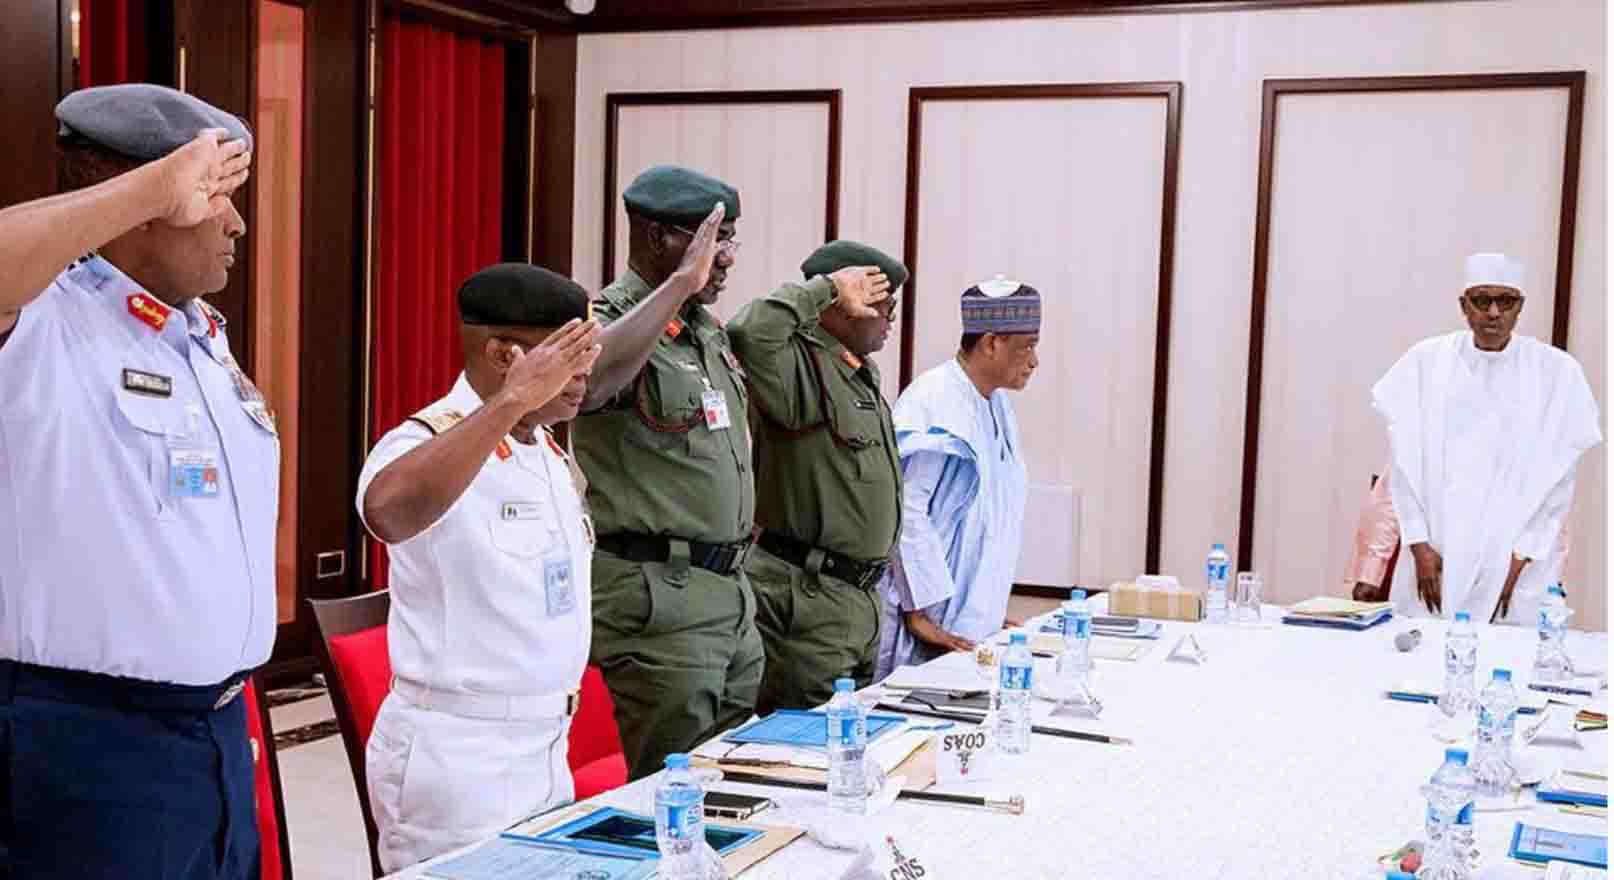 BREAKING: President Buhari Appoints New Service Chiefs